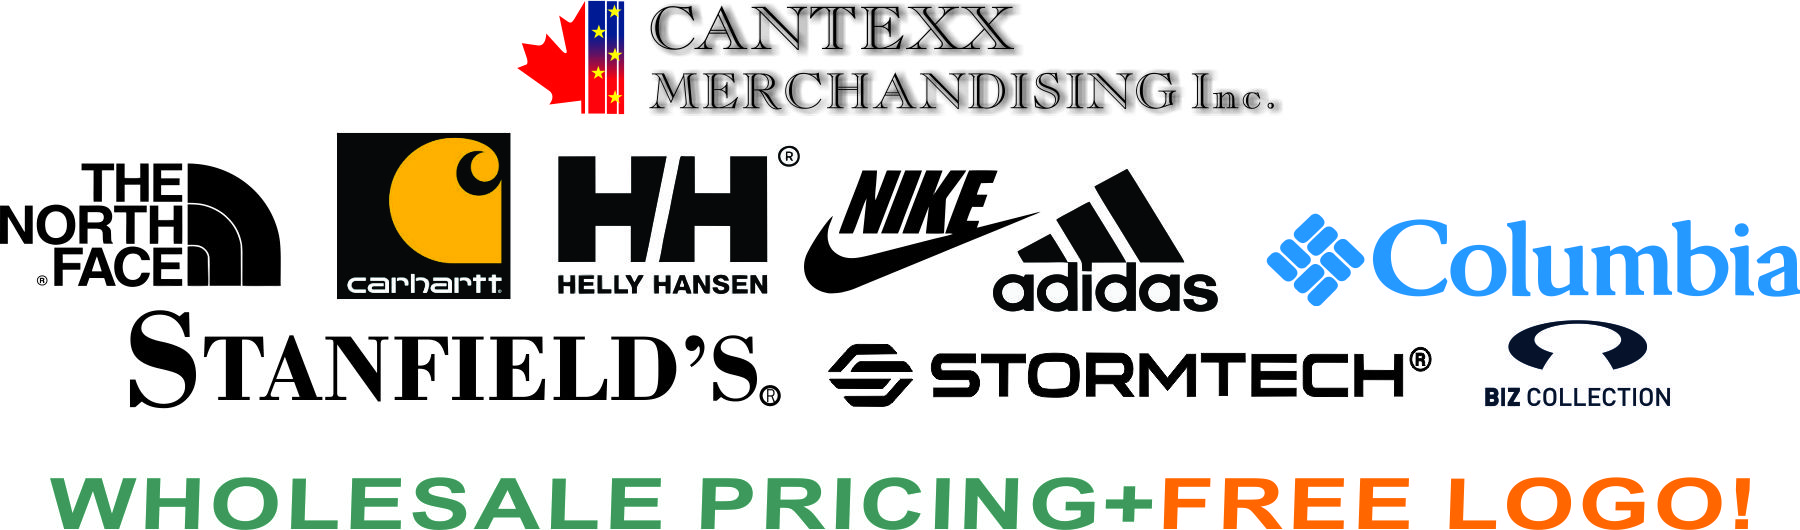 About Us - Cantexx Merchandising, Langley, BC